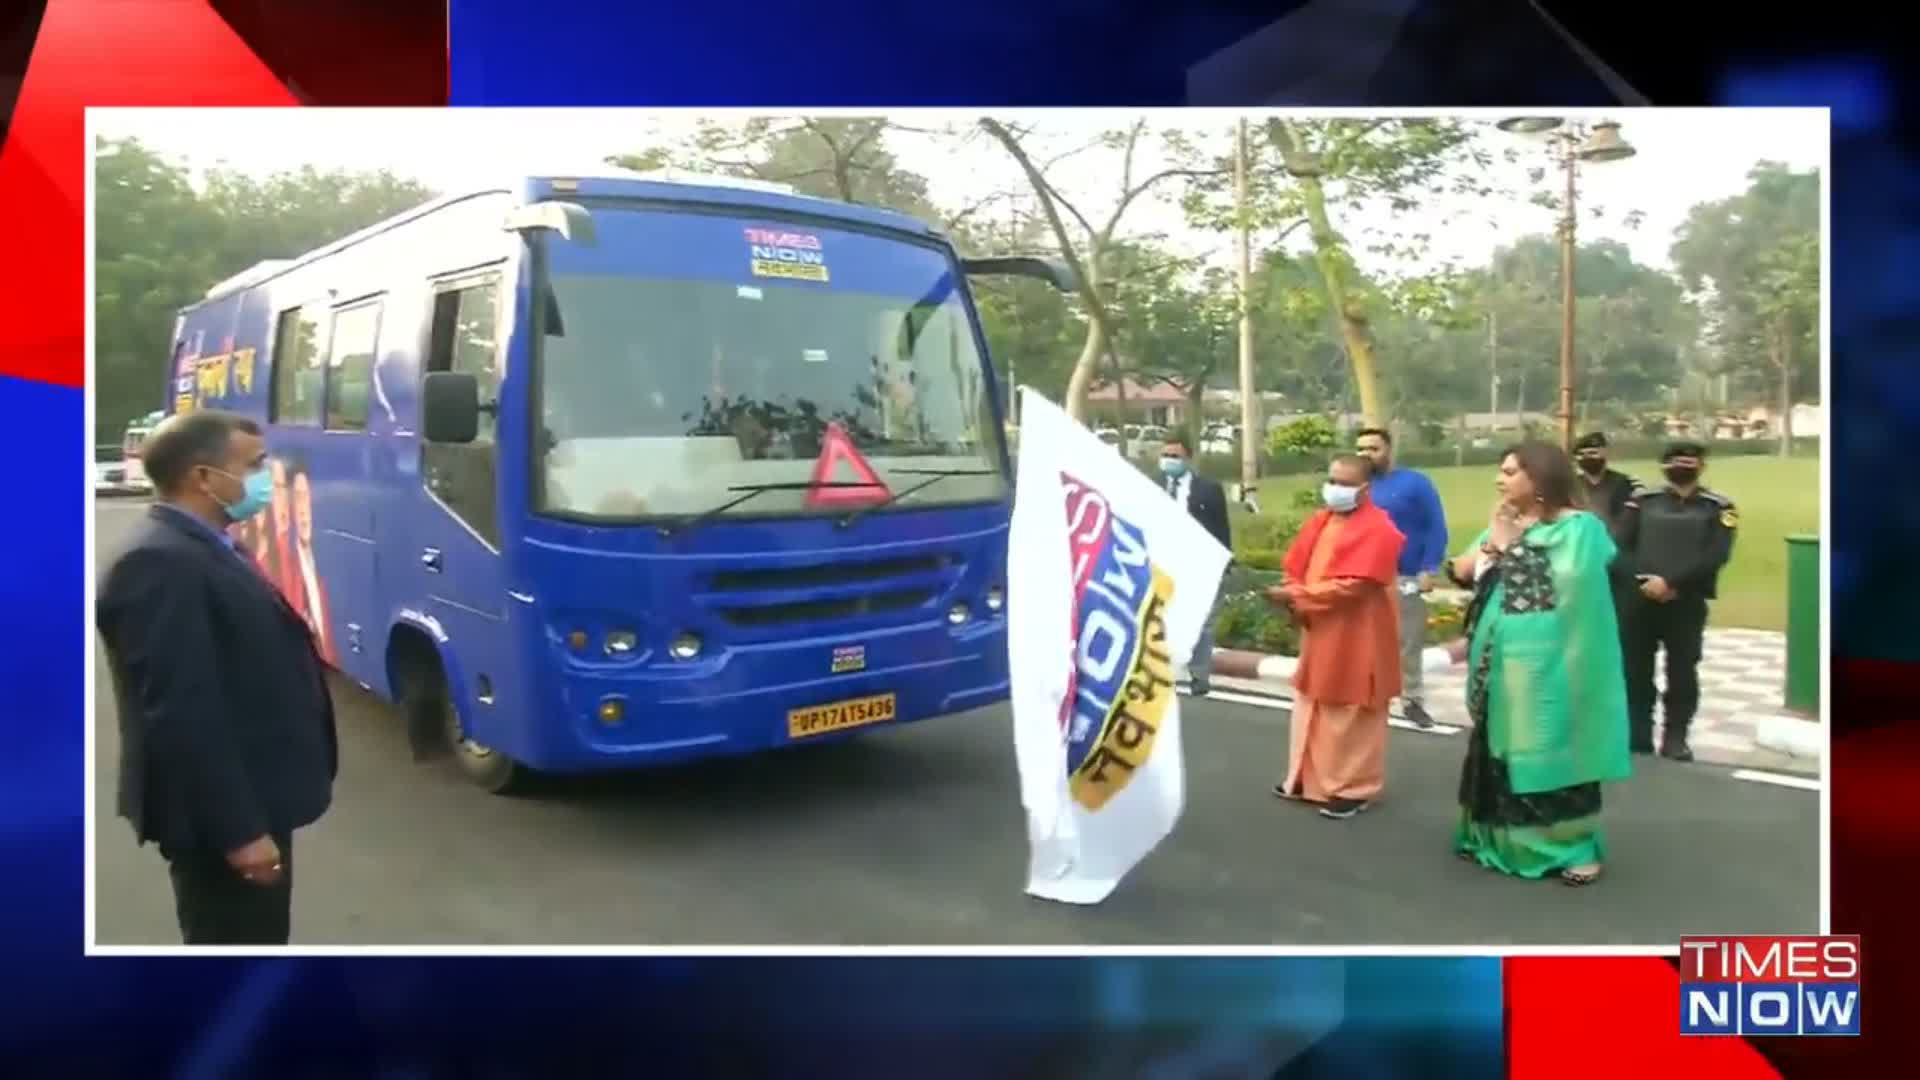 TIMES NOW on Twitter: &quot;UP CM @myogiadityanath flags off @TNNavbharat&#39;s election bus. #March10WithTimesNow - Stay tuned to India&#39;s Election News Headquarters and never miss an update. @navikakumar https://t.co/8MxFGBXNpL&quot; / Twitter